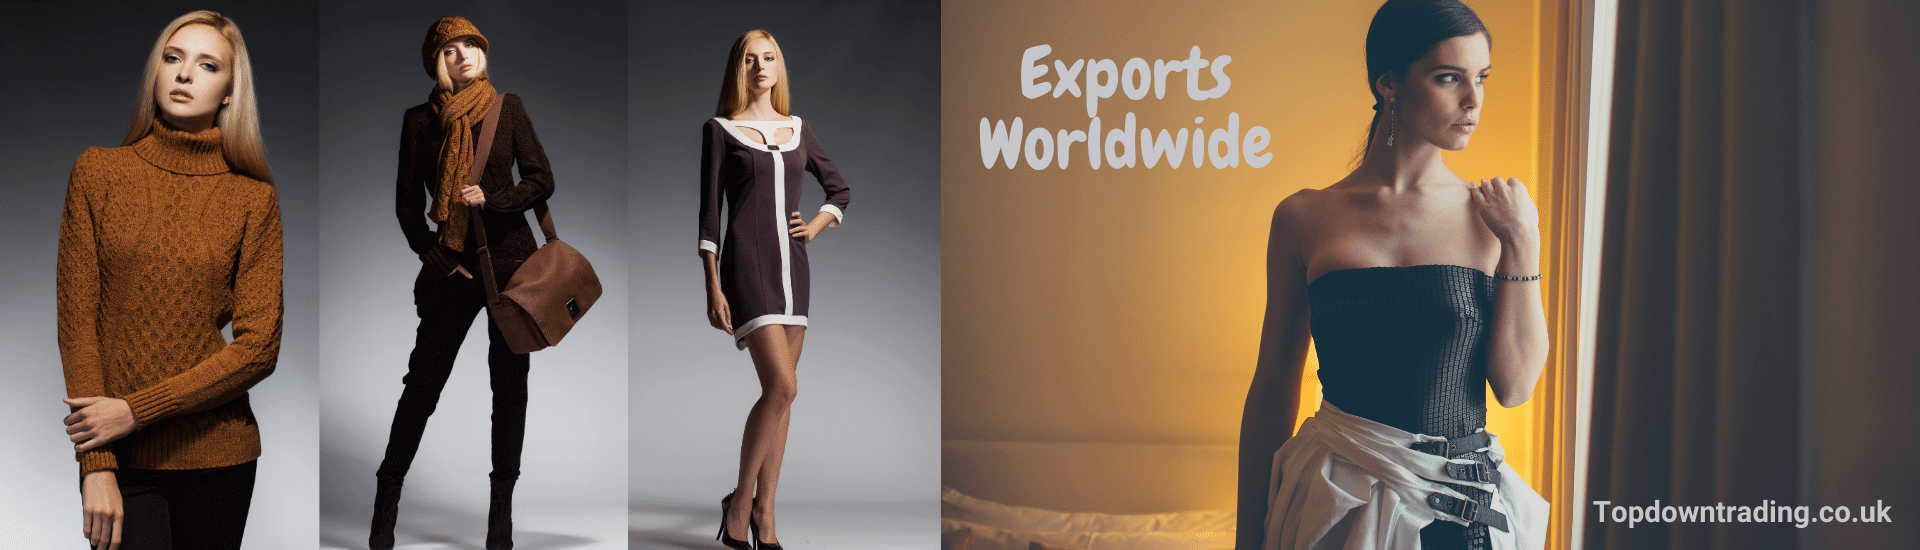 Wholesale Fashion | Export | Top Down Trading